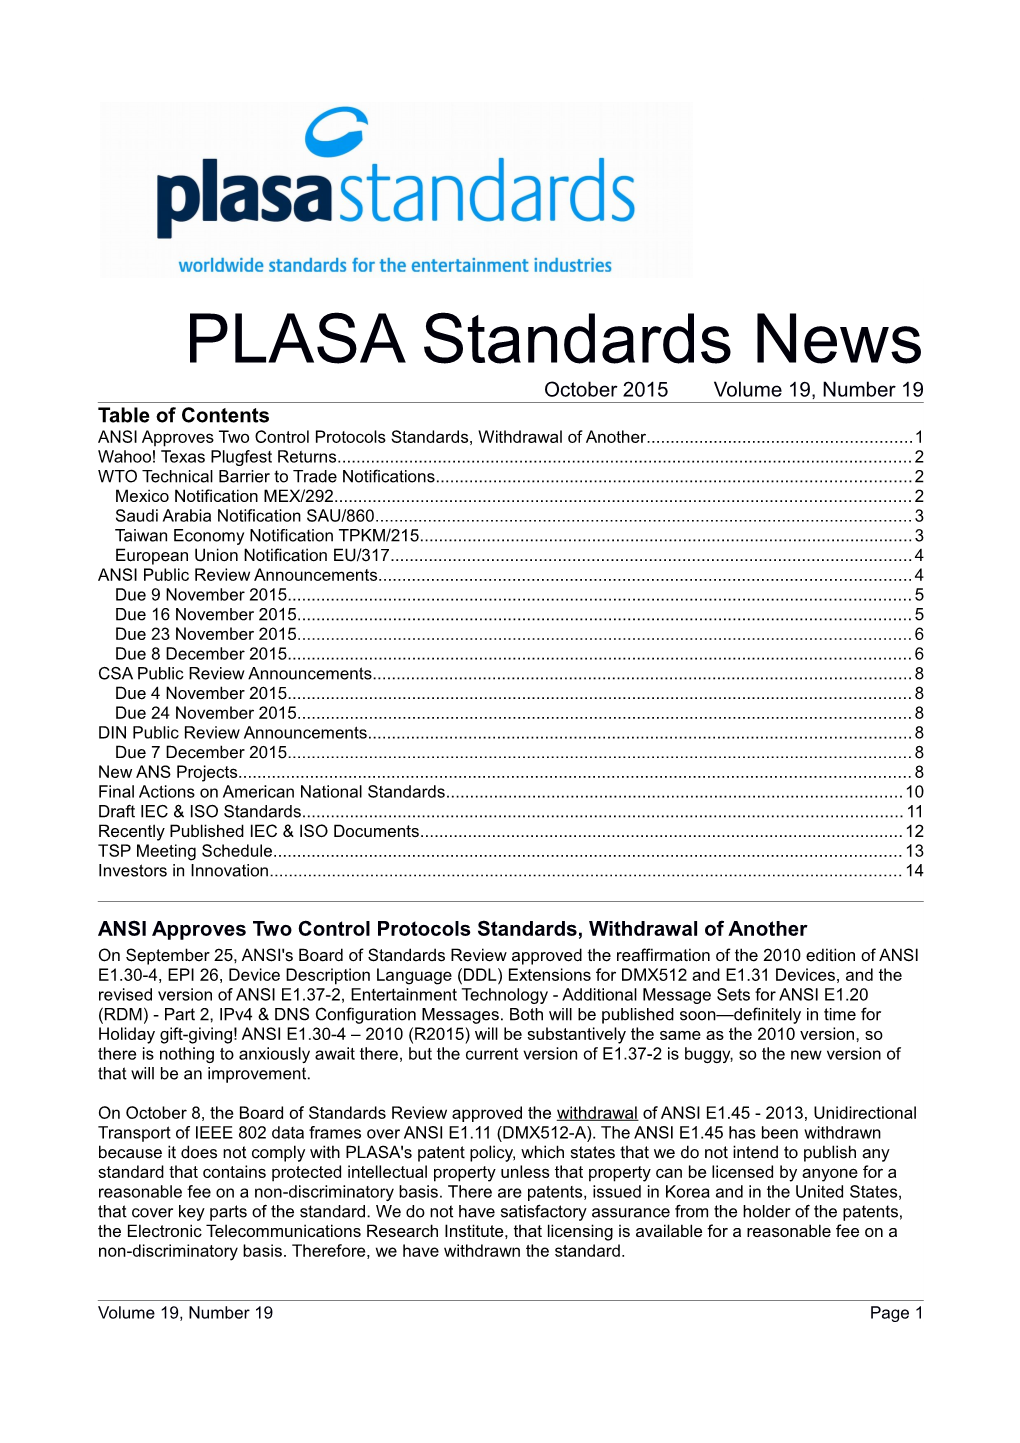 Standards News October 2015 Volume 19, Number 19 Table of Contents ANSI Approves Two Control Protocols Standards, Withdrawal of Another